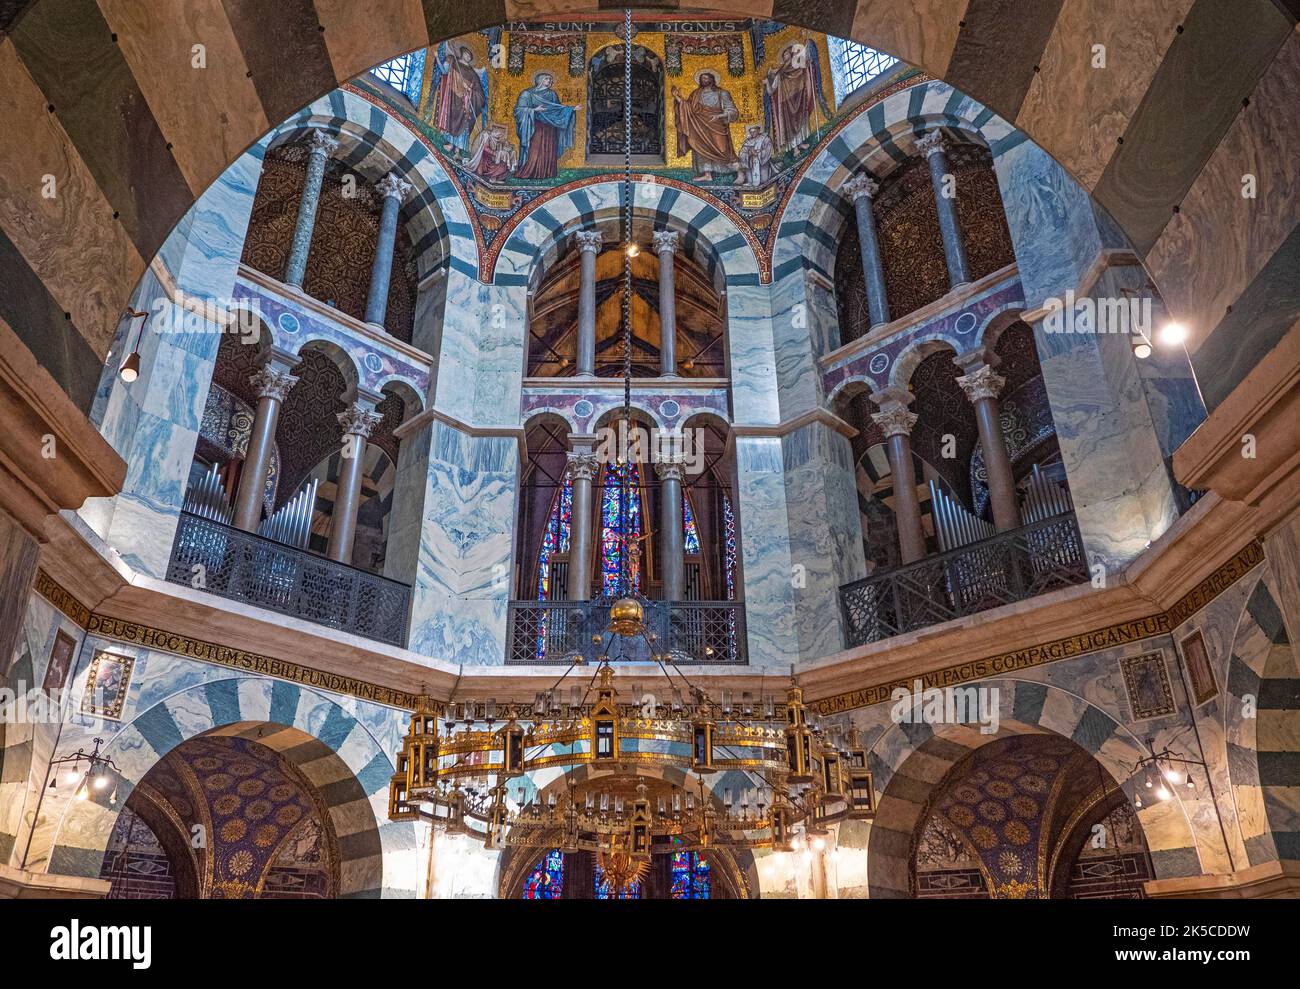 Octagon in Aachen Cathedral, Aachen, North Rhine-Westphalia, Germany Stock Photo